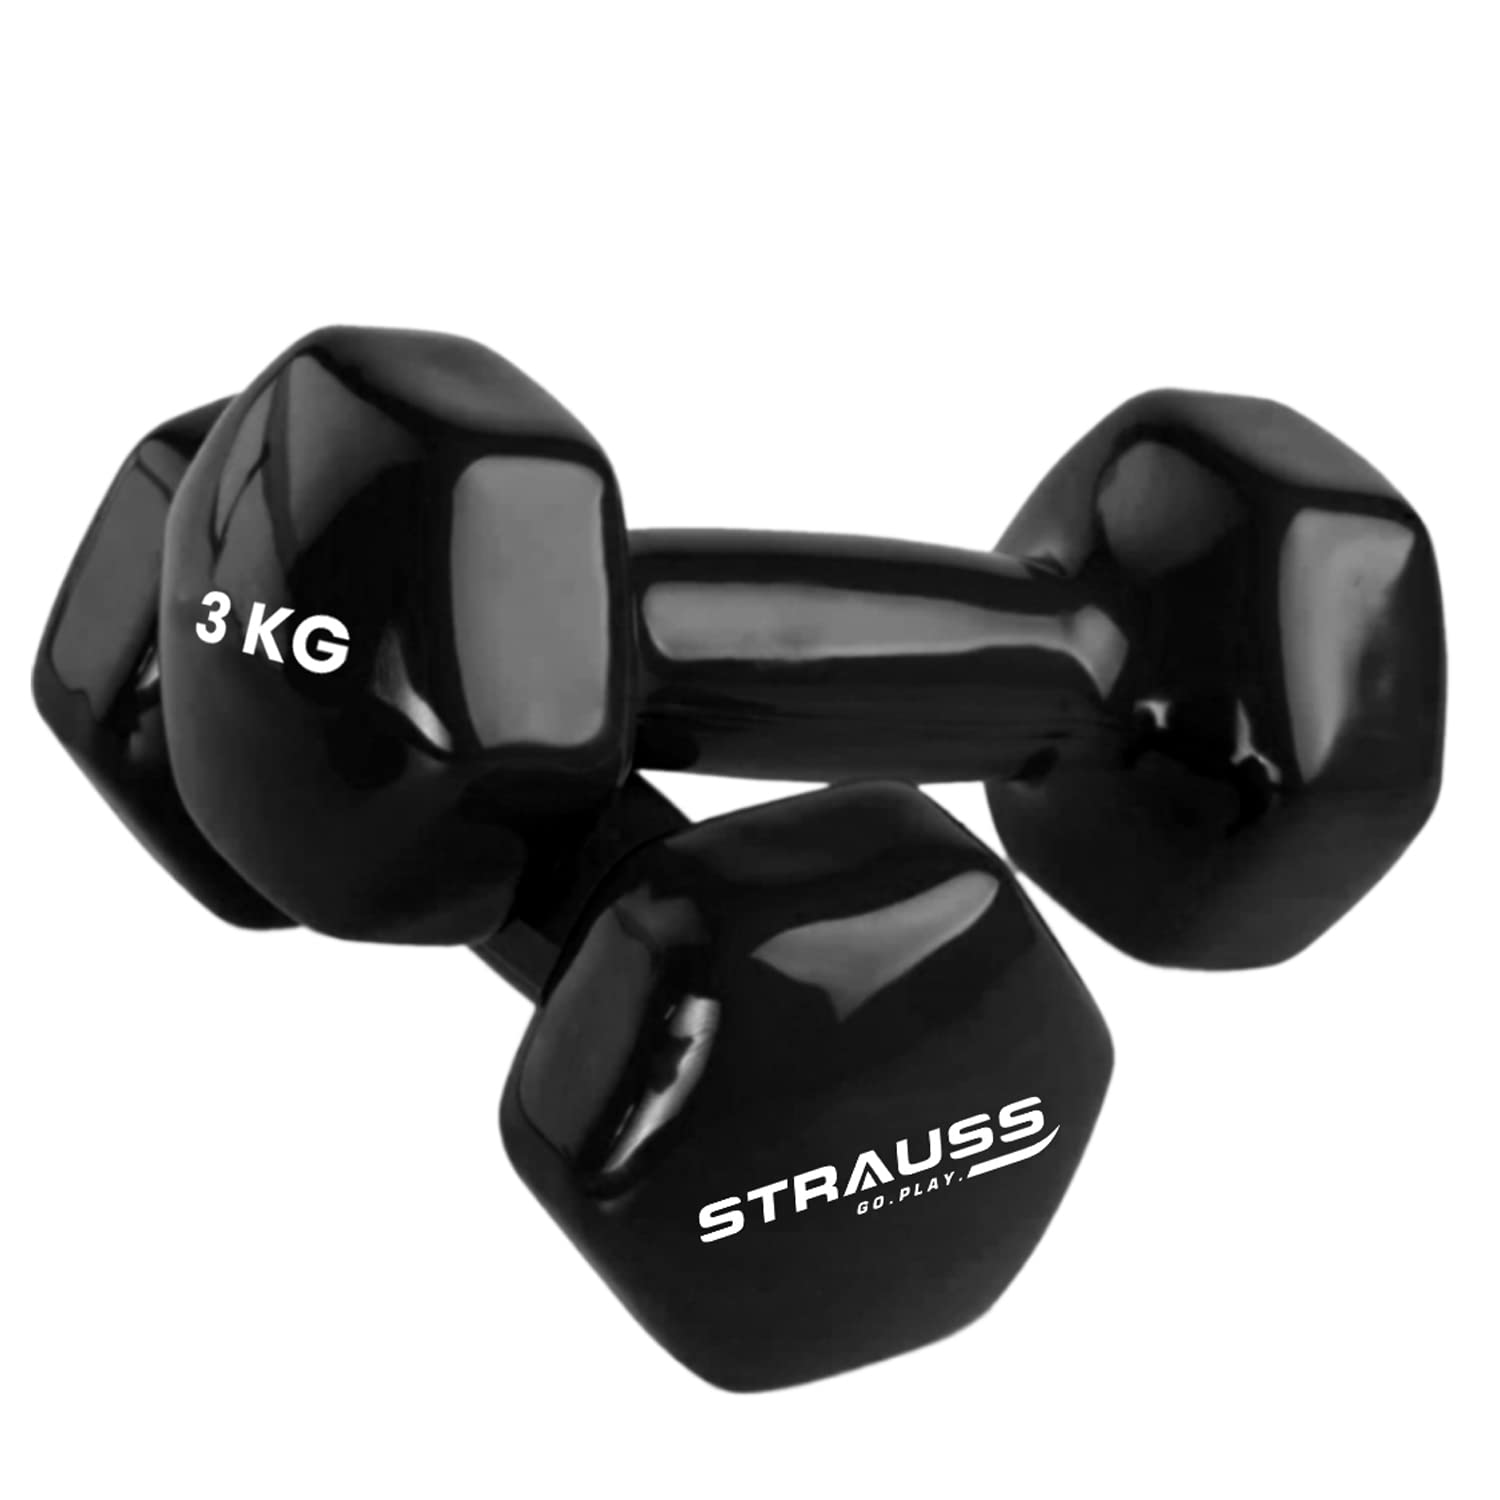 Strauss Premium Vinyl Dumbbells Weight for Men & Women | 4 Kg (Each) | 8 Kg (Pair) | Ideal for Home Workout, Yoga, Pilates, Gym Exercises | Non-Slip, Easy to Hold, Scratch Resistant (Black)